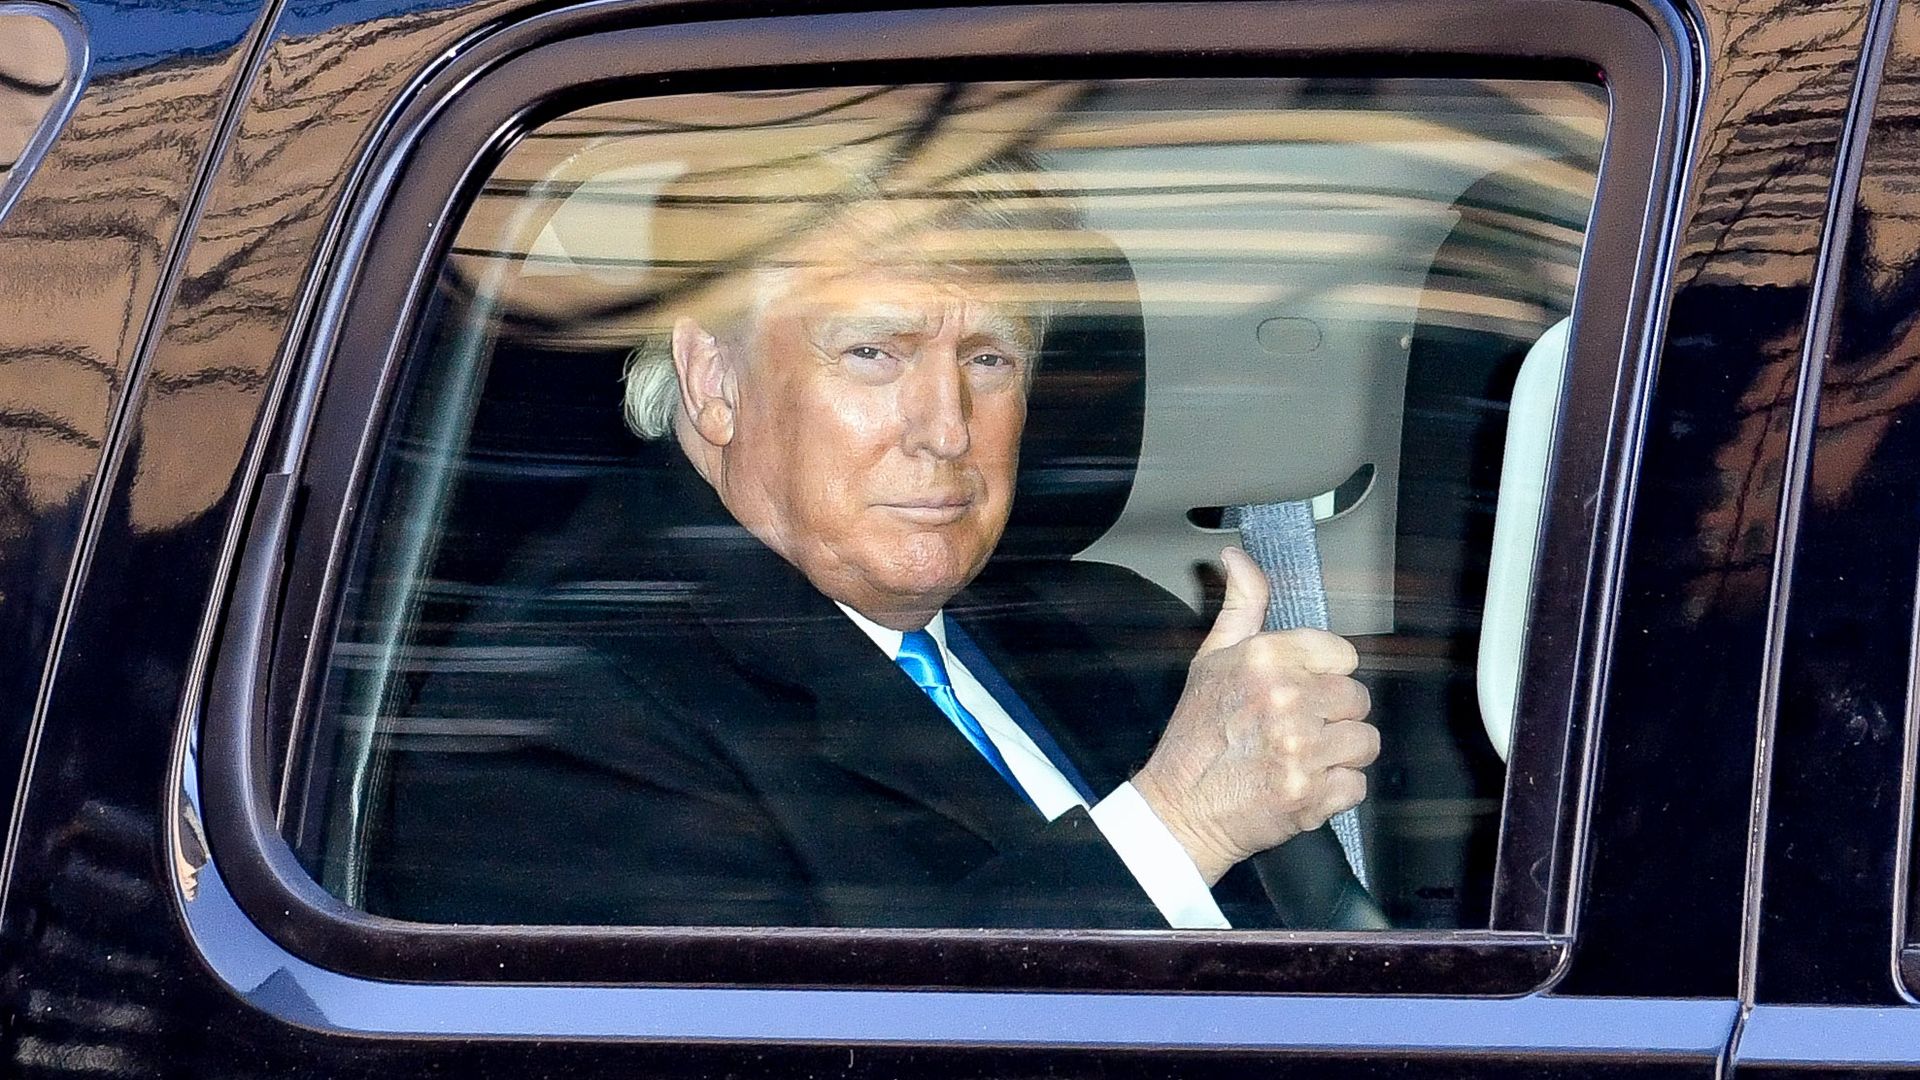 Donald Trump is pictured giving a thumbs up through a car window 